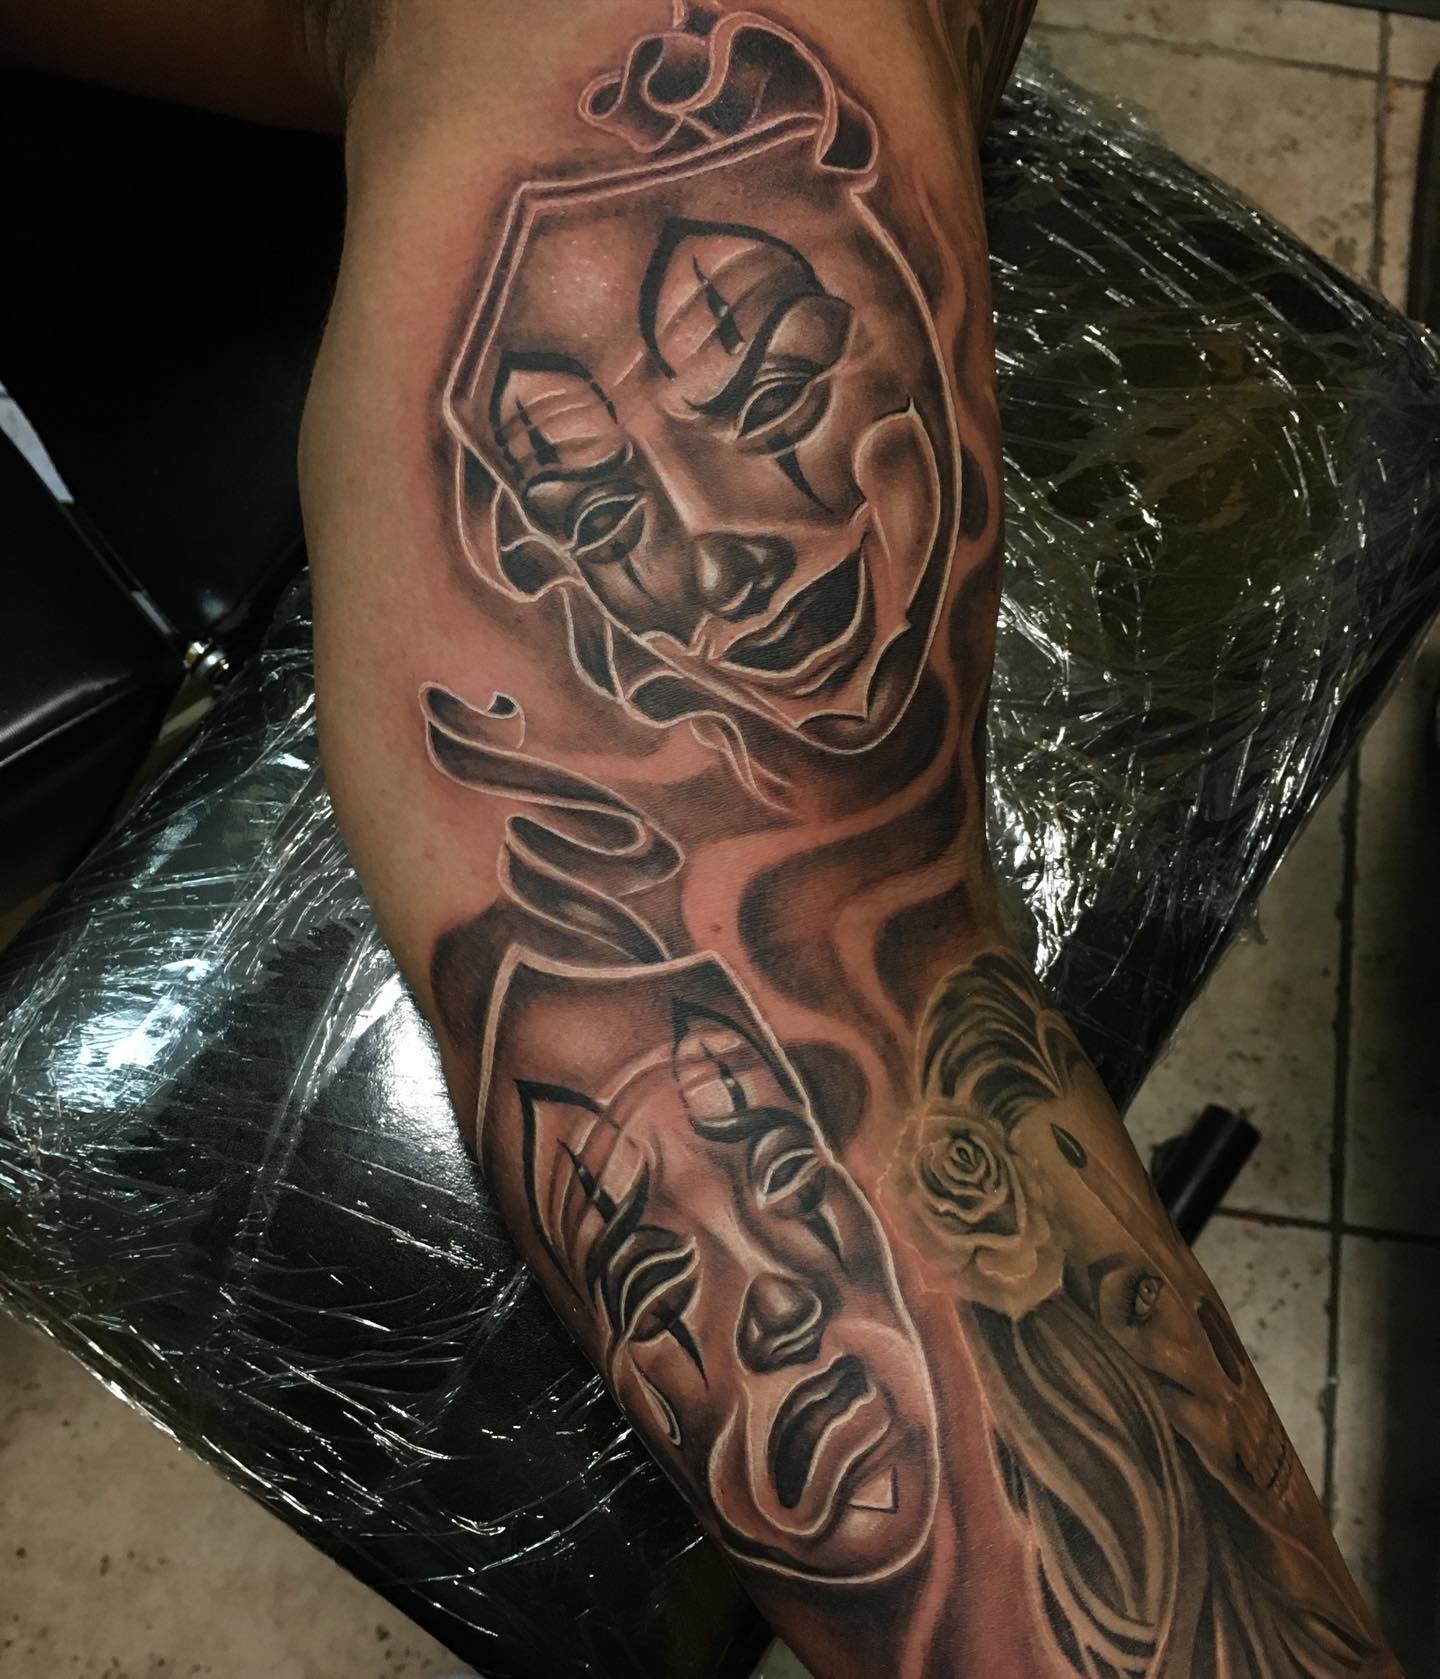 Chicano Smile Now Cry Later Tattoo -mr.conejo__13